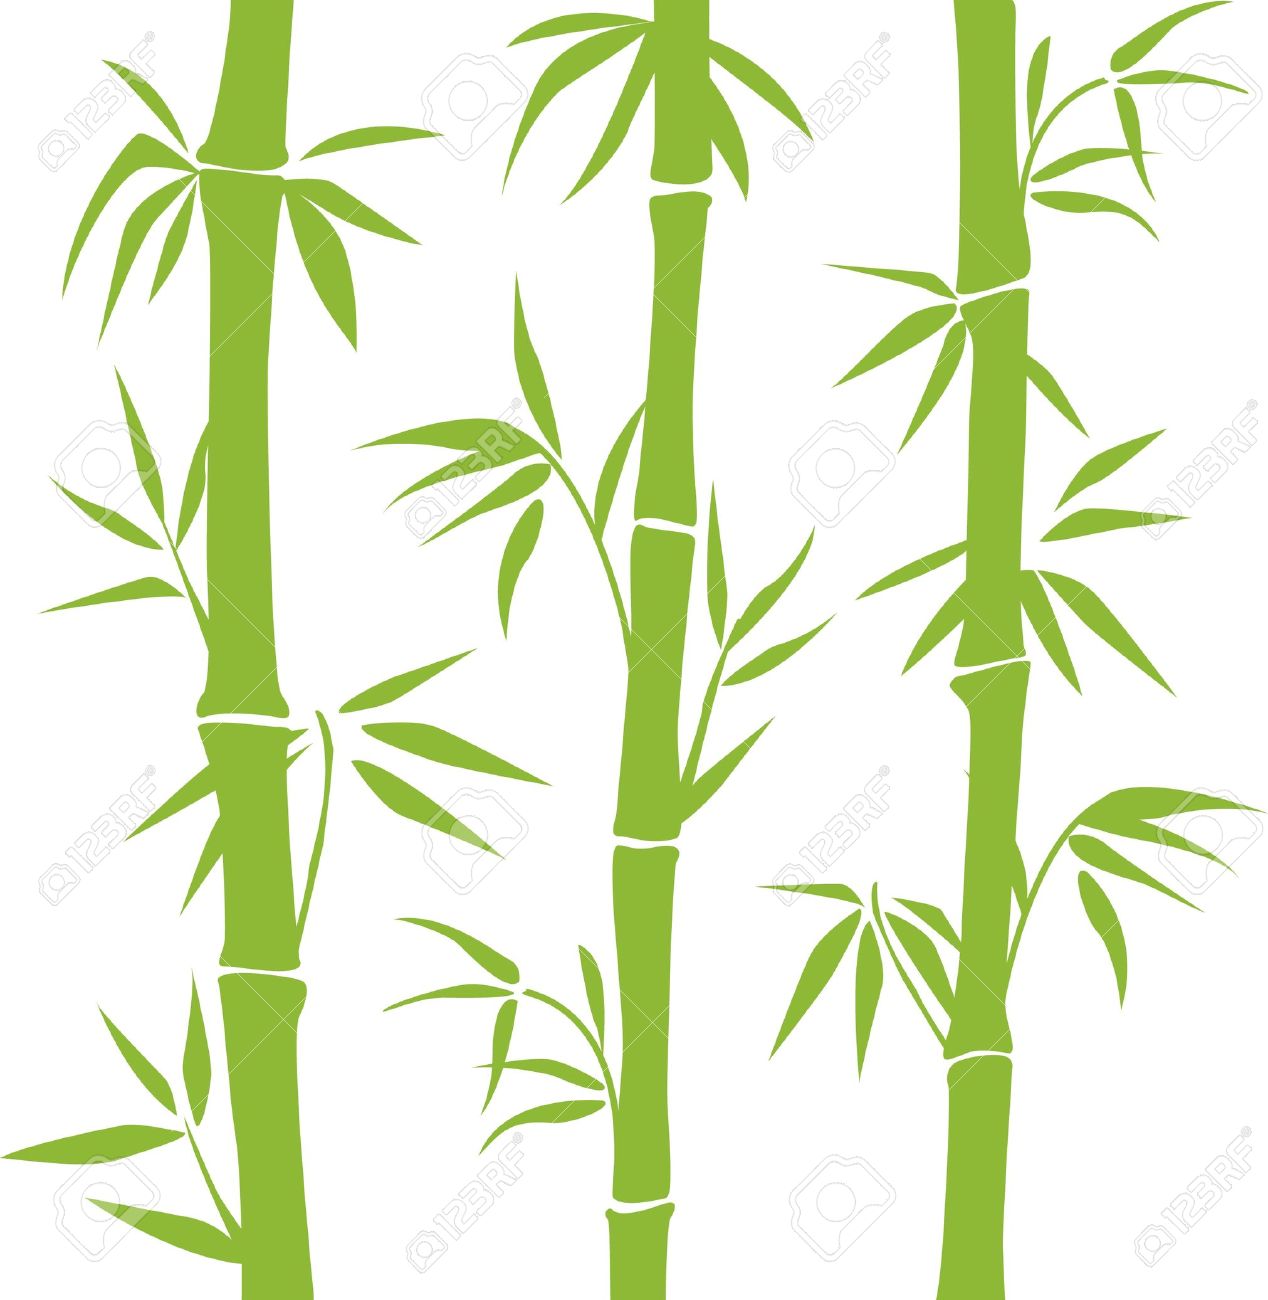 The bamboo tree growth clipart.